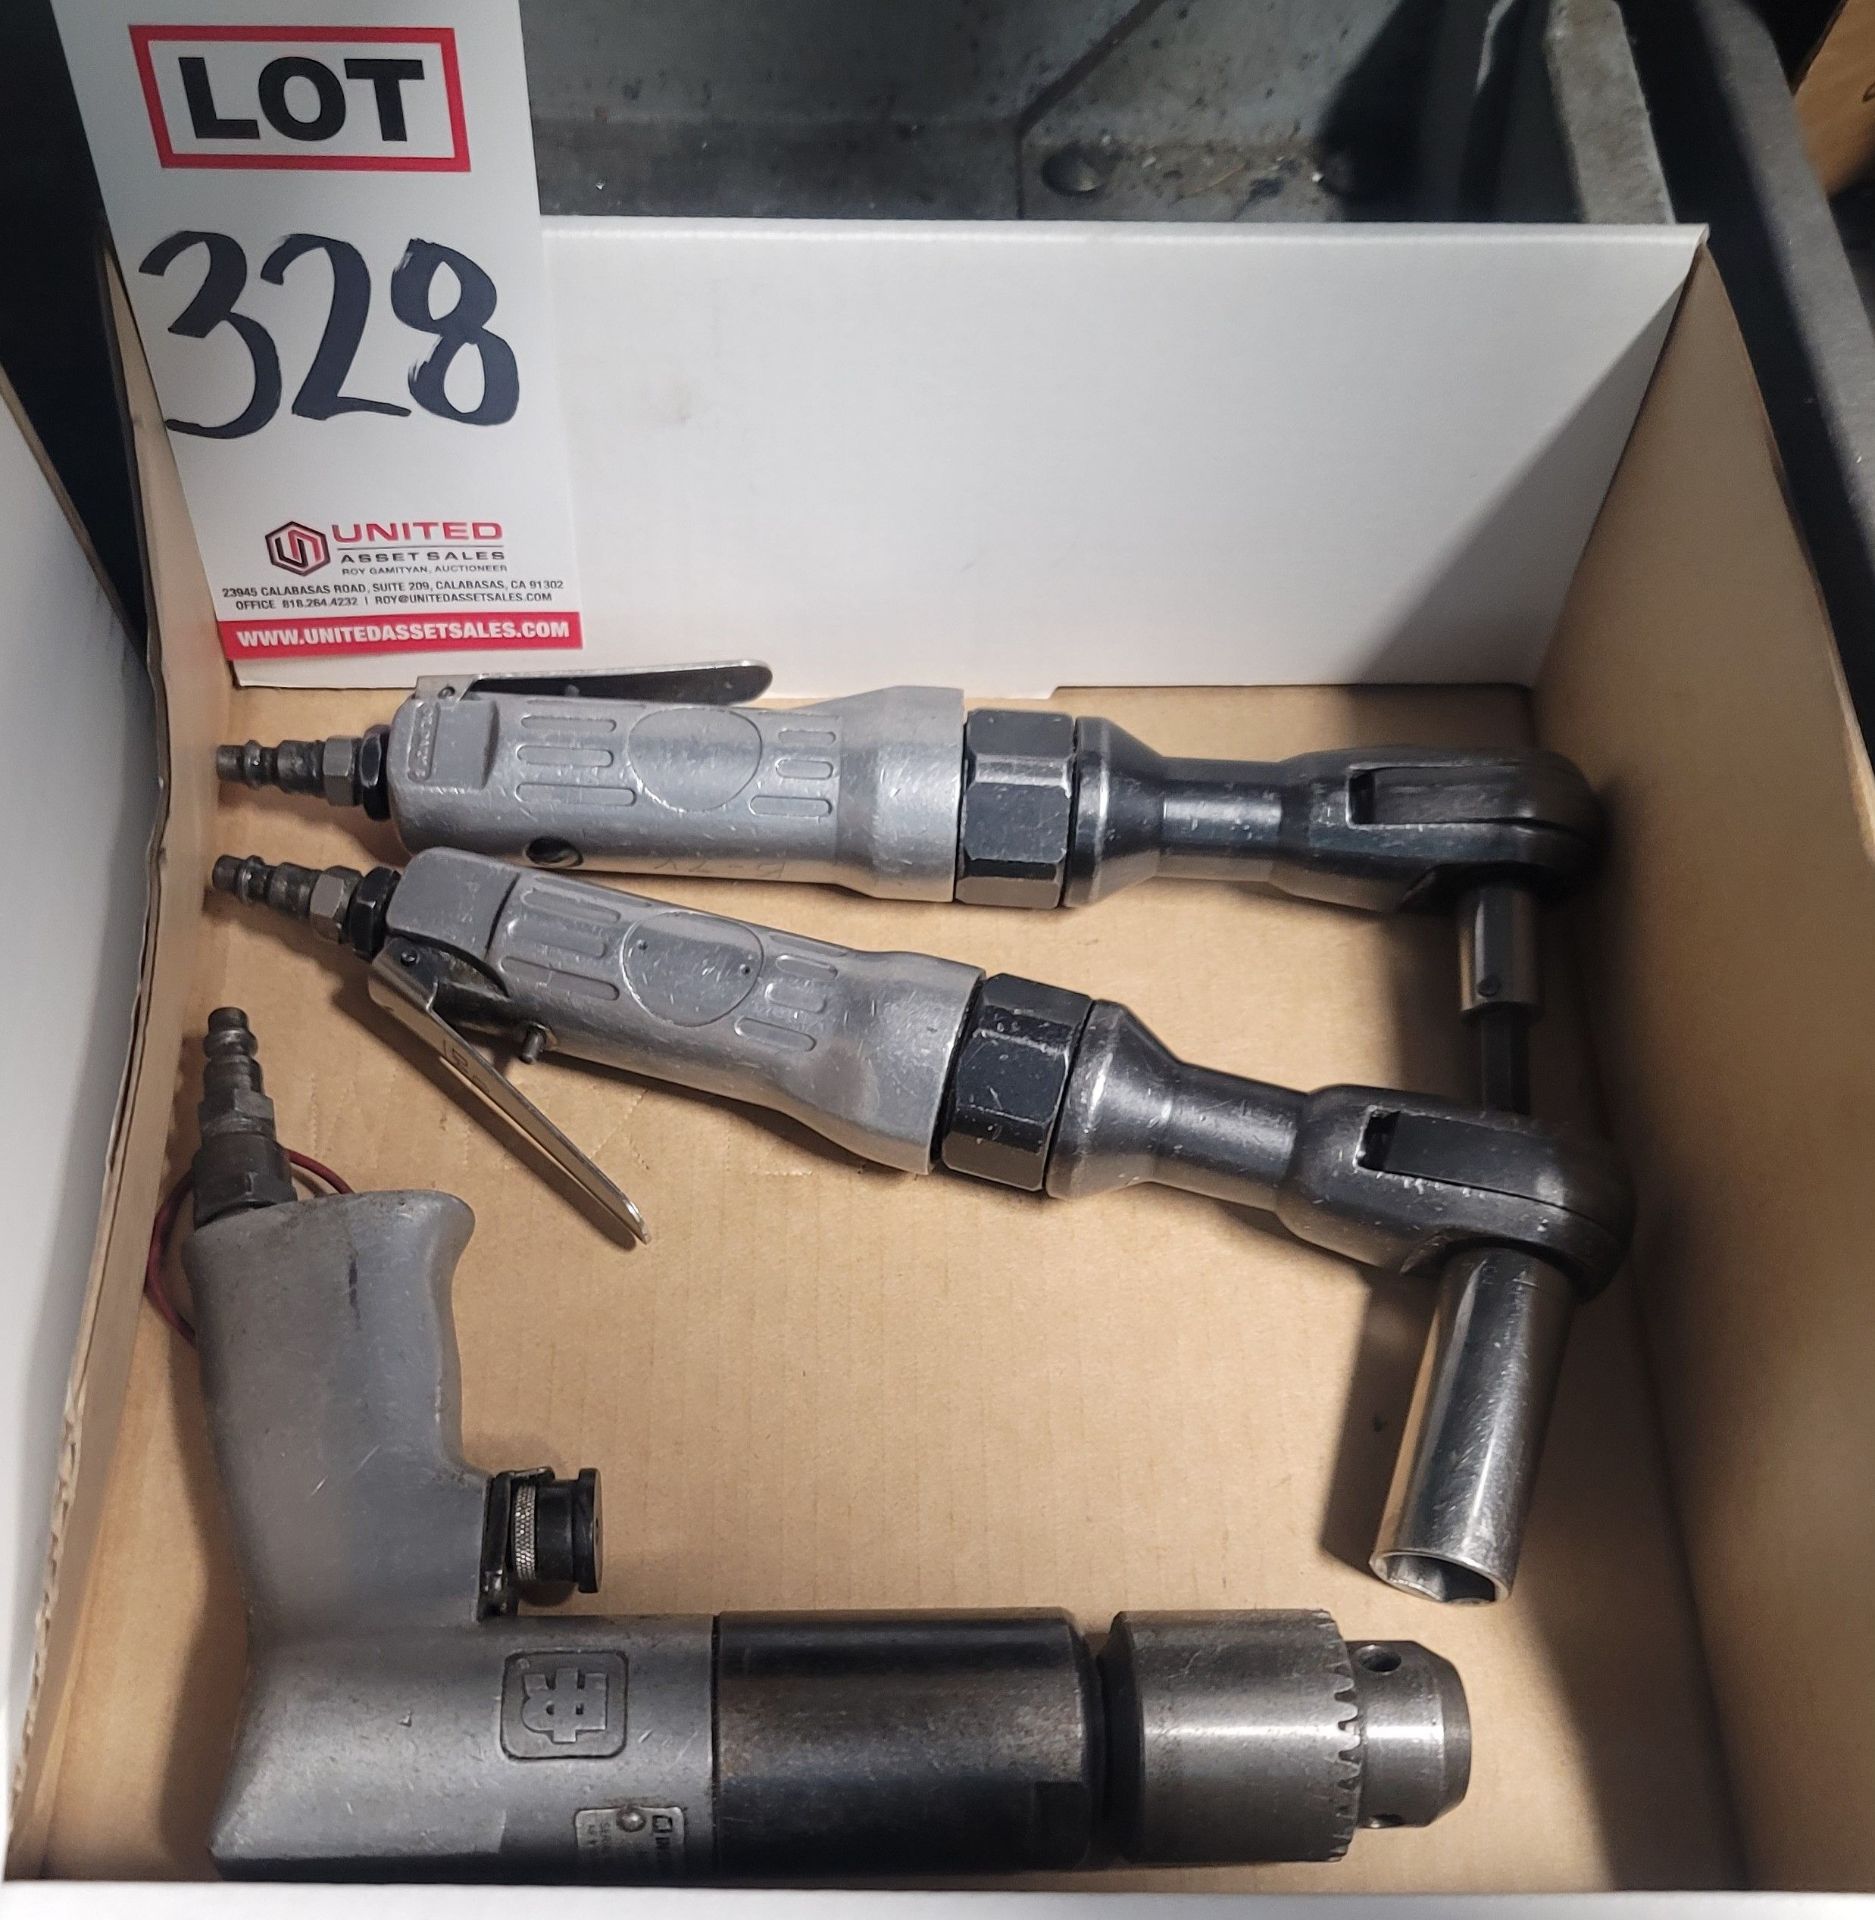 LOT - (2) 3/8" DRIVE AIR RATCHETS AND (1) INGERSOLL-RAND 1/2" DRIVE AIR DRILL, MODEL 7803